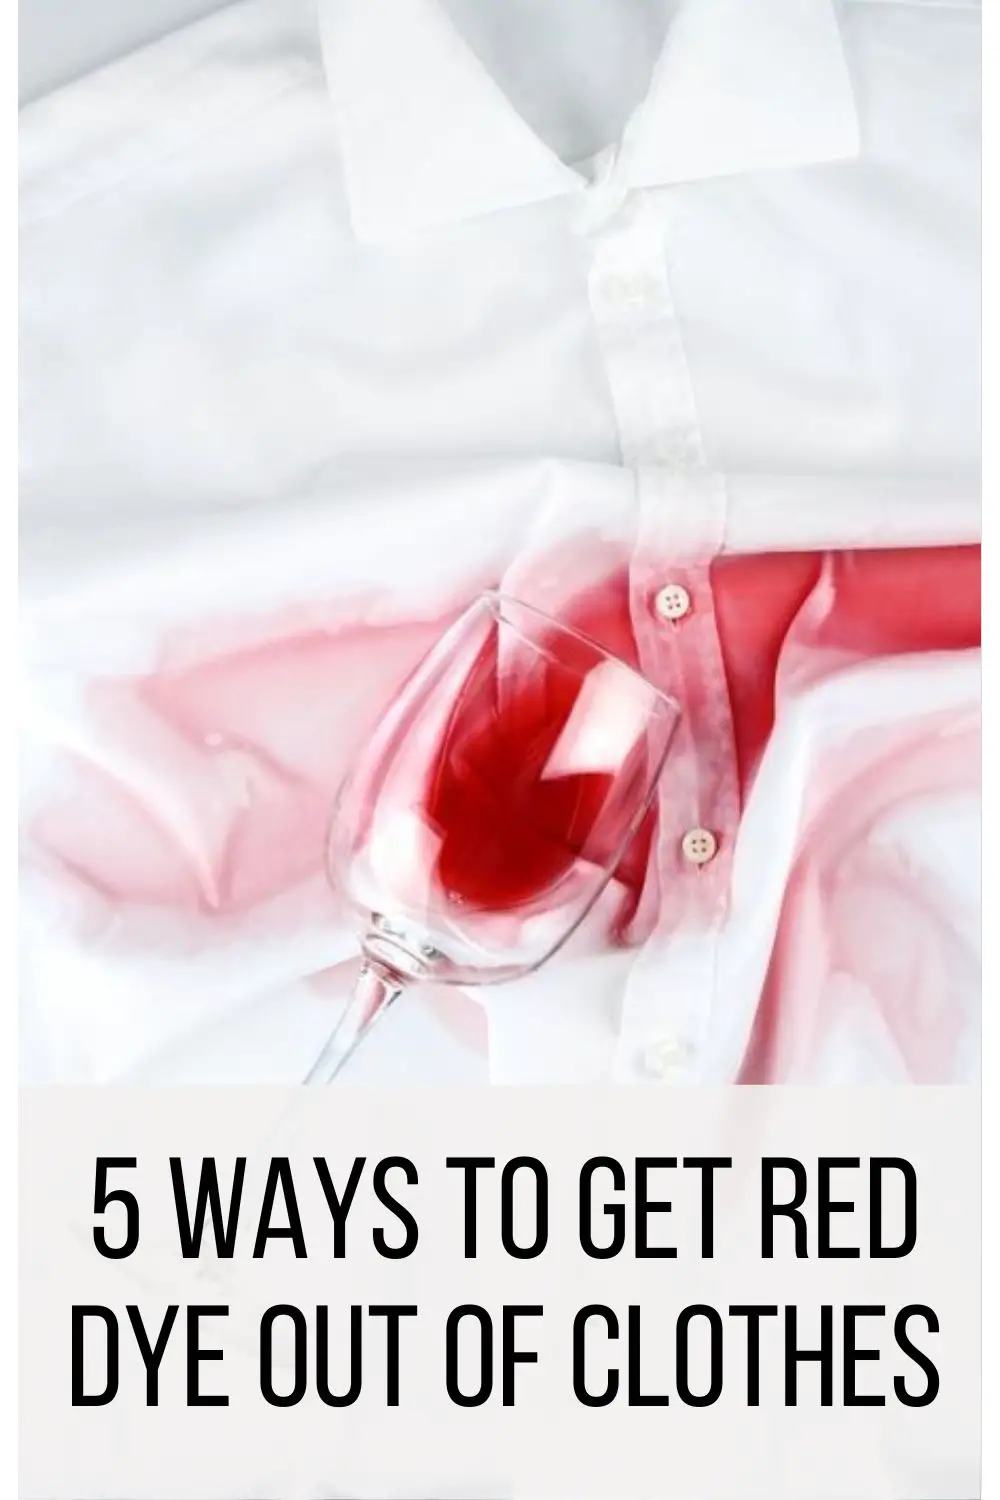 5 Ways to Get Red Dye Out of Clothes